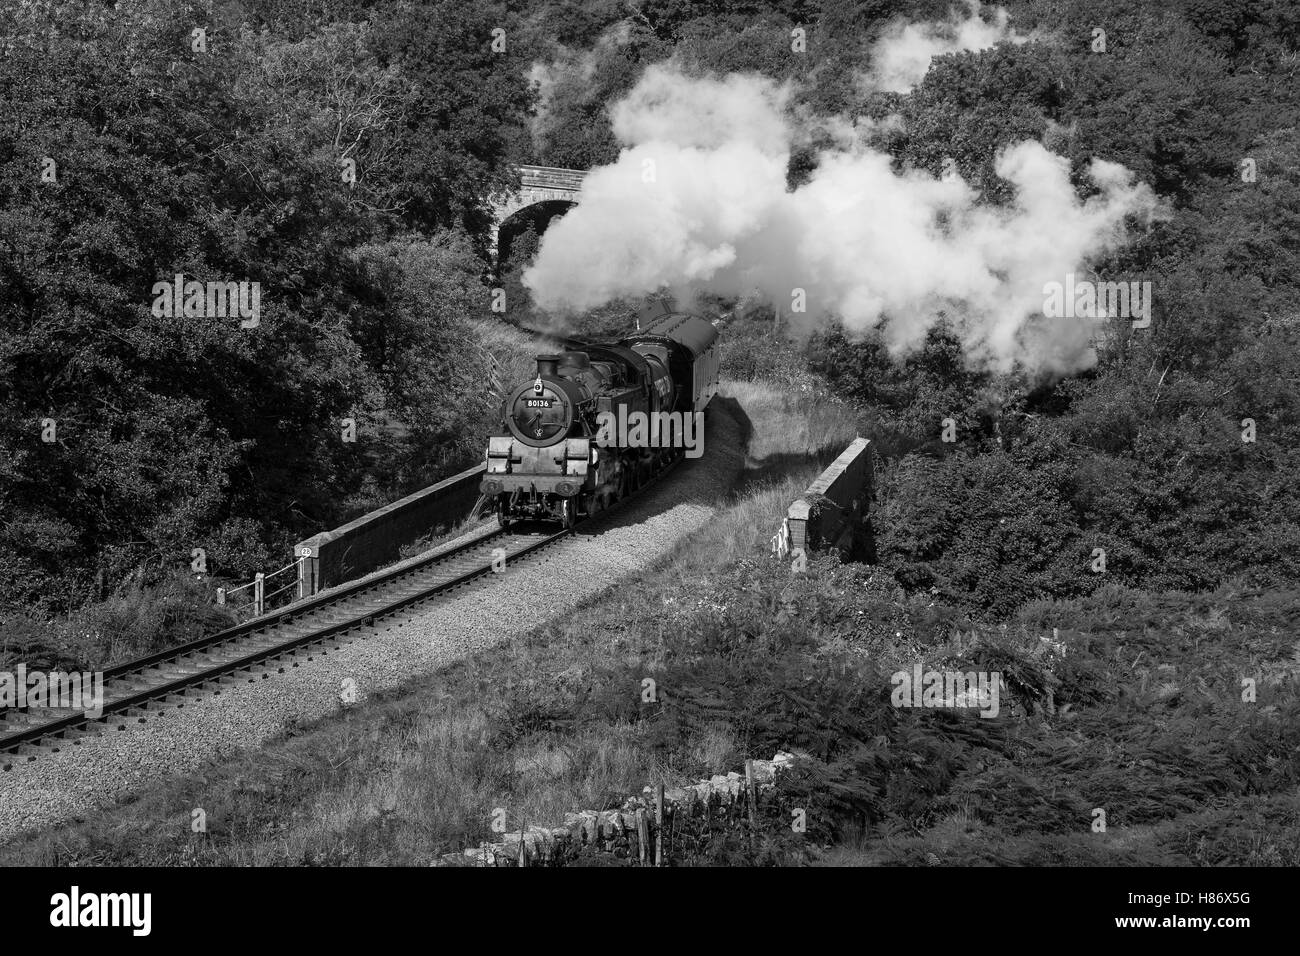 Standrard Tank 80136 on a photographers charter on the North Yorkshire Moors Railway. Stock Photo